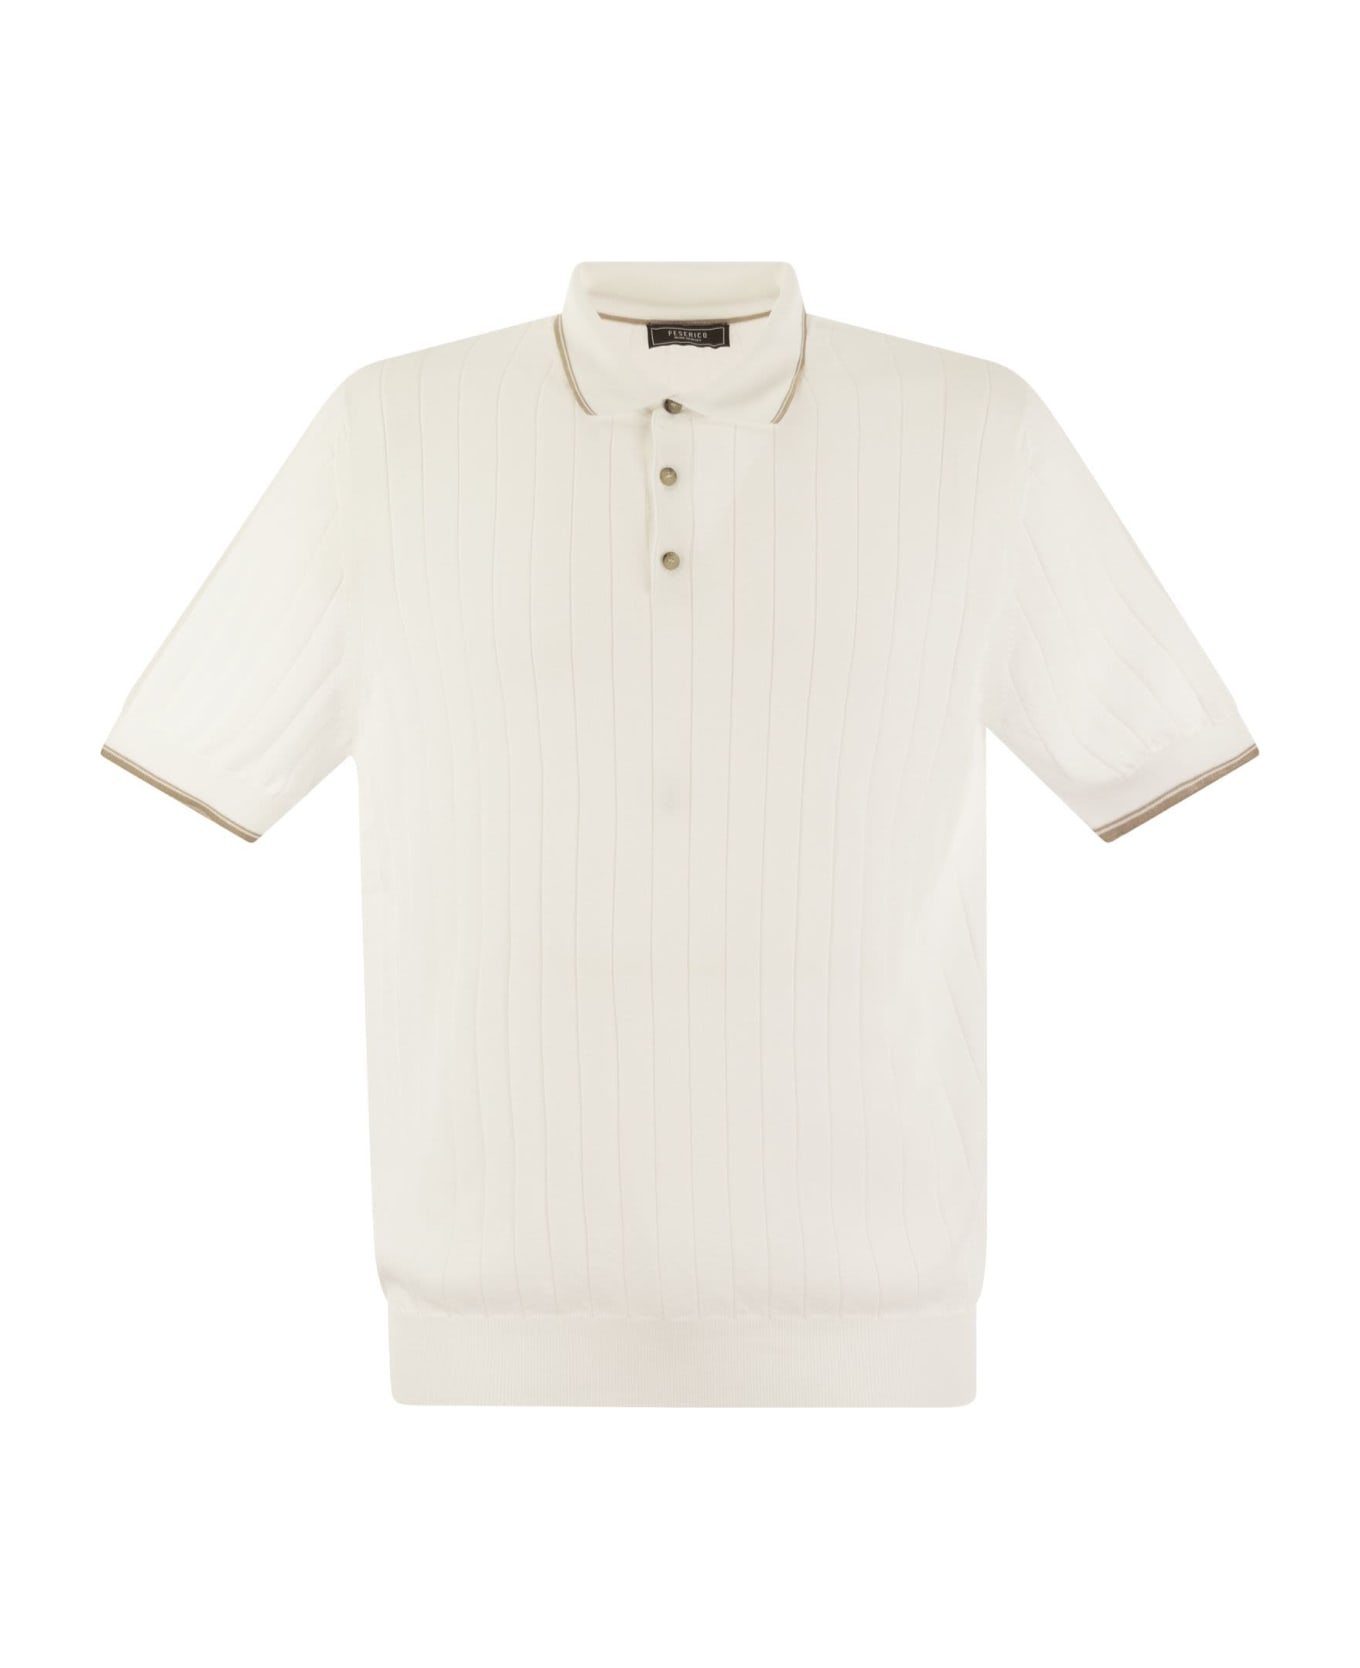 Peserico Polo Shirt In Pure Cotton Crepe Yarn With Flat Rib - White/beige ポロシャツ